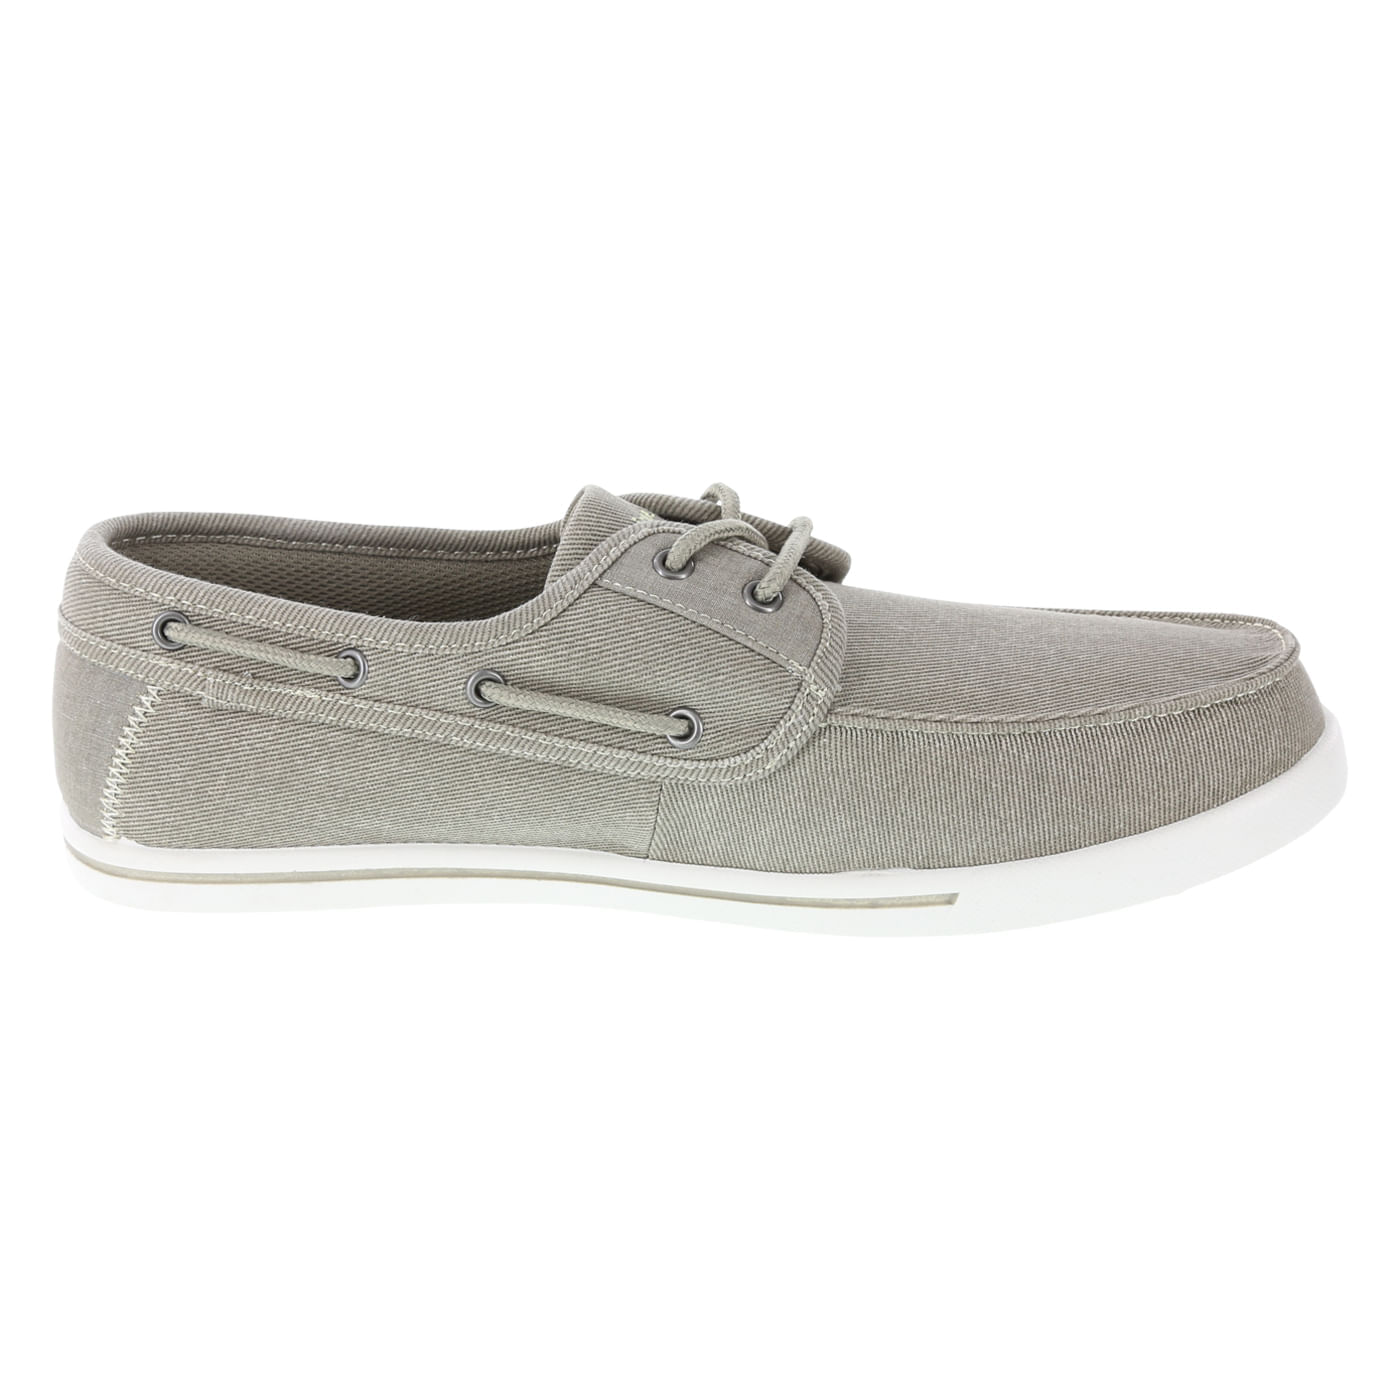 payless boat shoes